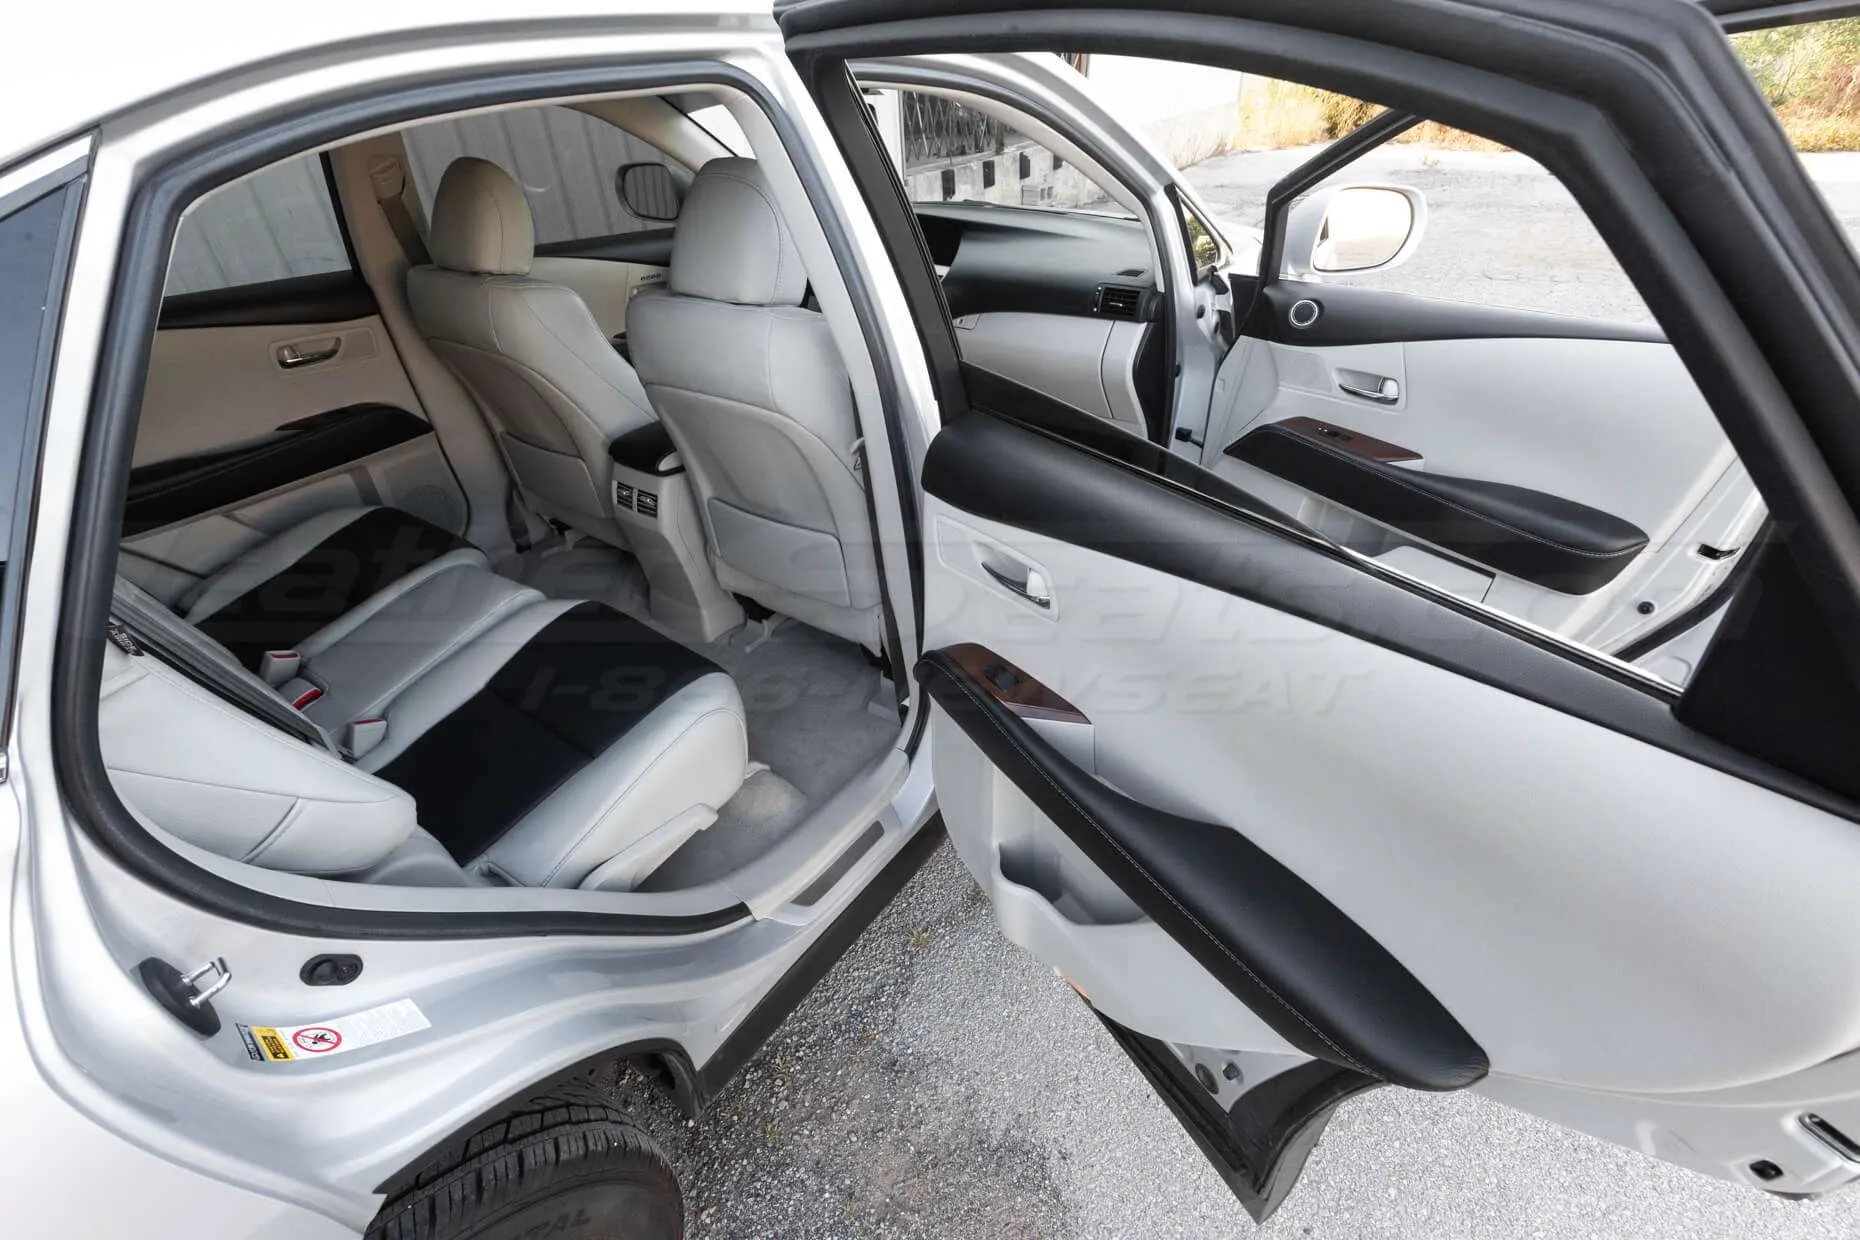 Lexus RX350 Leather Seats - Frost & Black - Door panel inserts and armrest